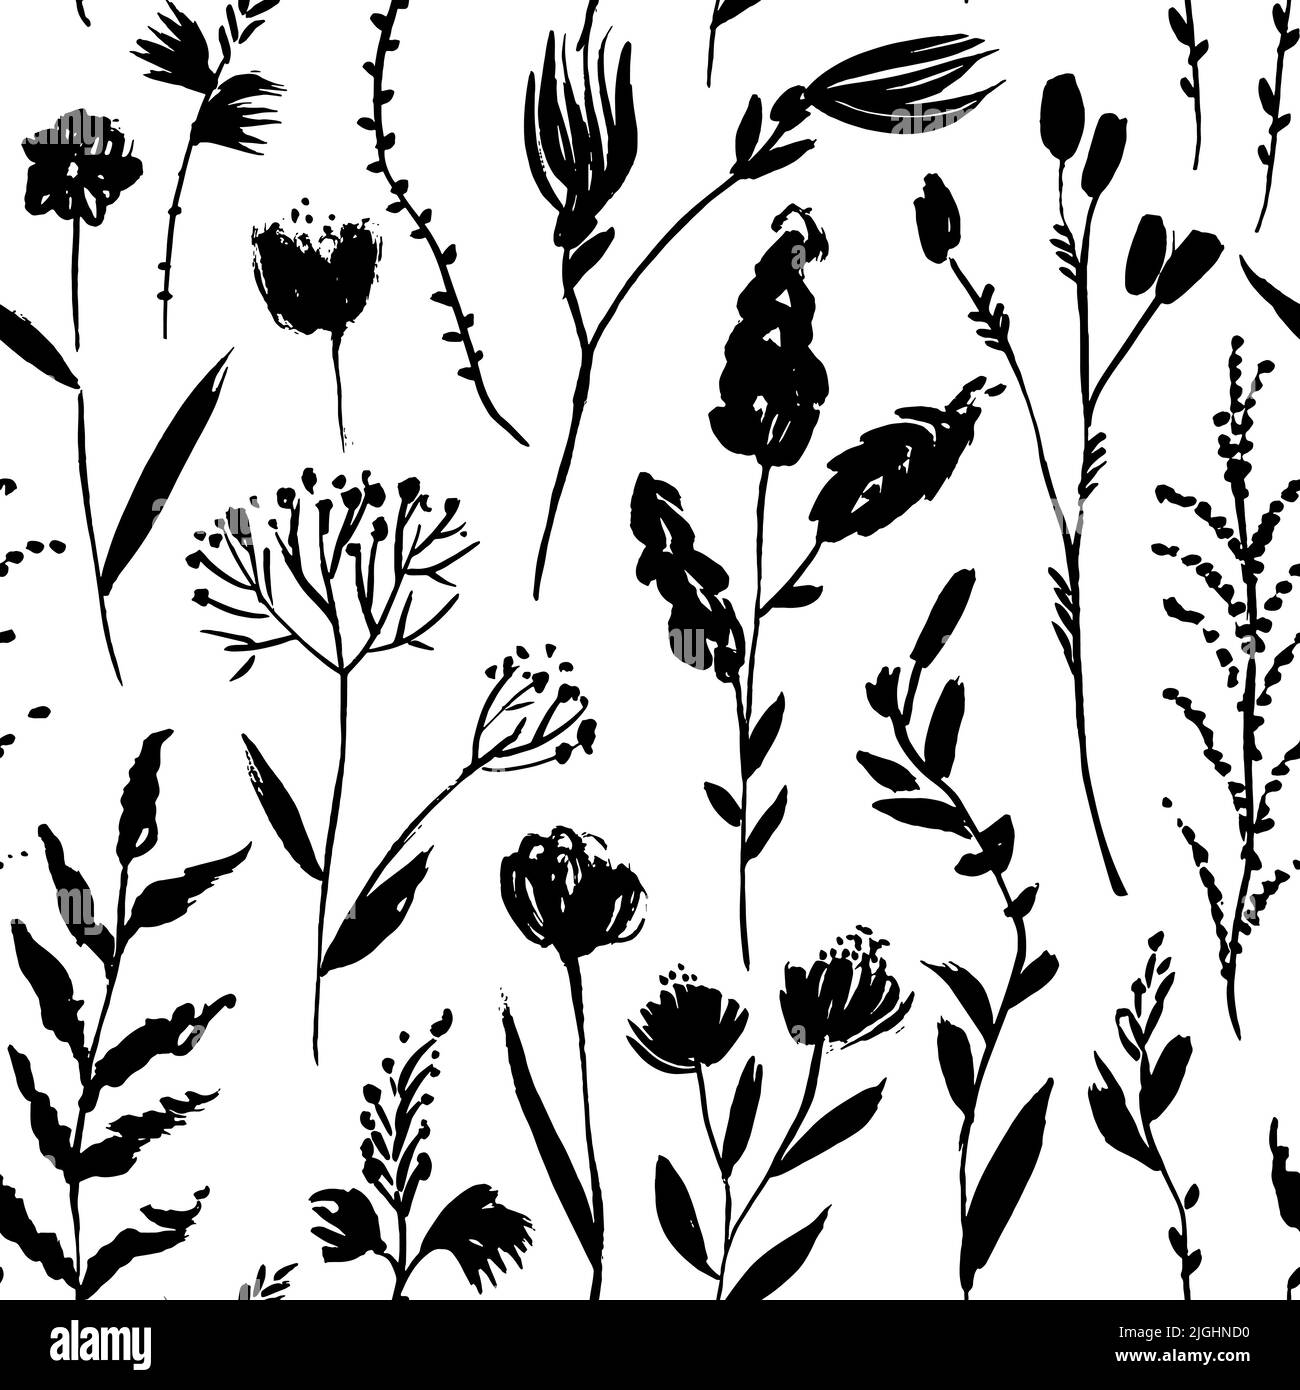 Wild floral hand drawn vector seamless pattern. Stock Vector